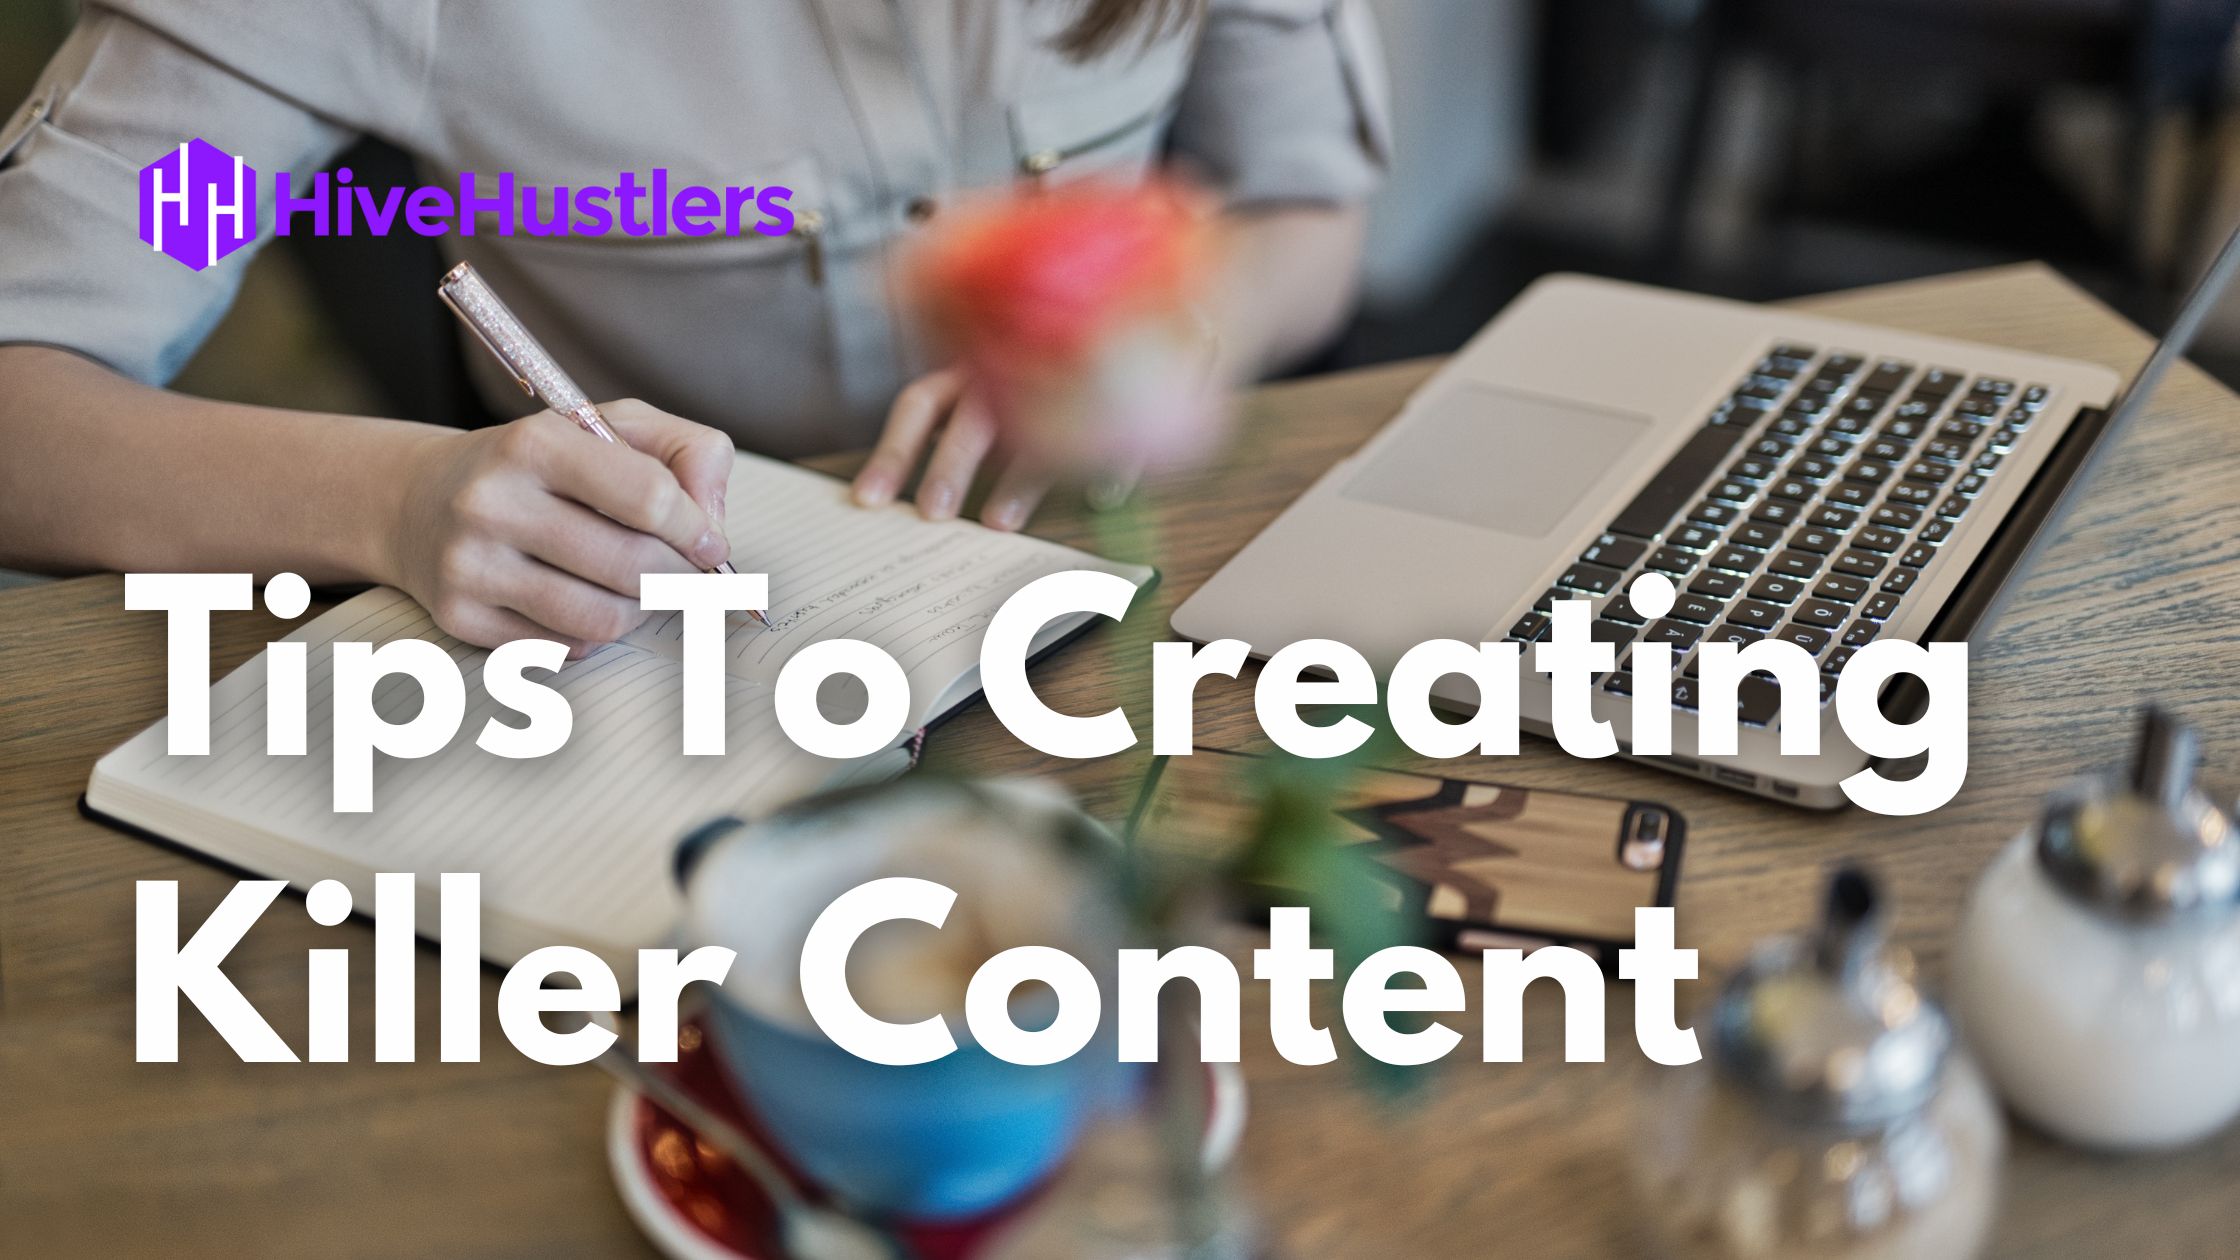 @hivehustlers/tips-to-creating-killer-content